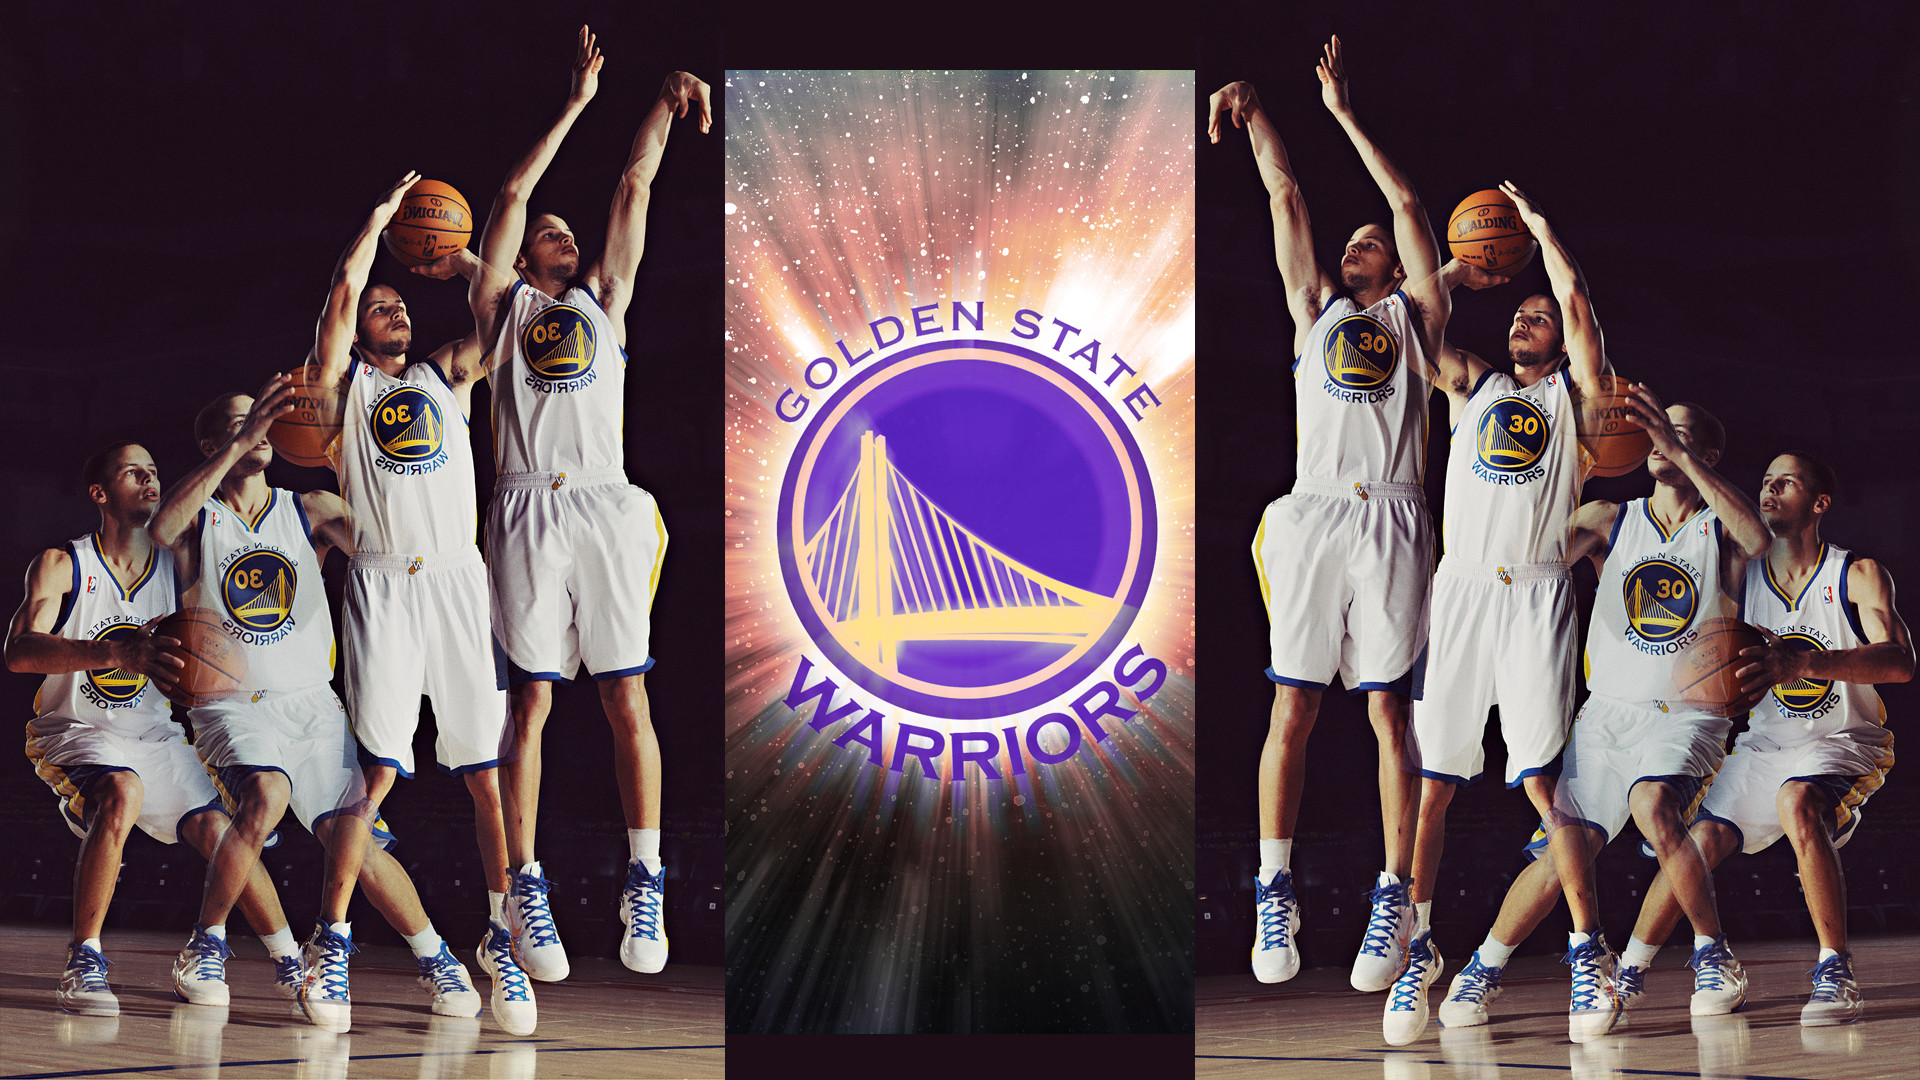 stephen curry shooting form wallpaper